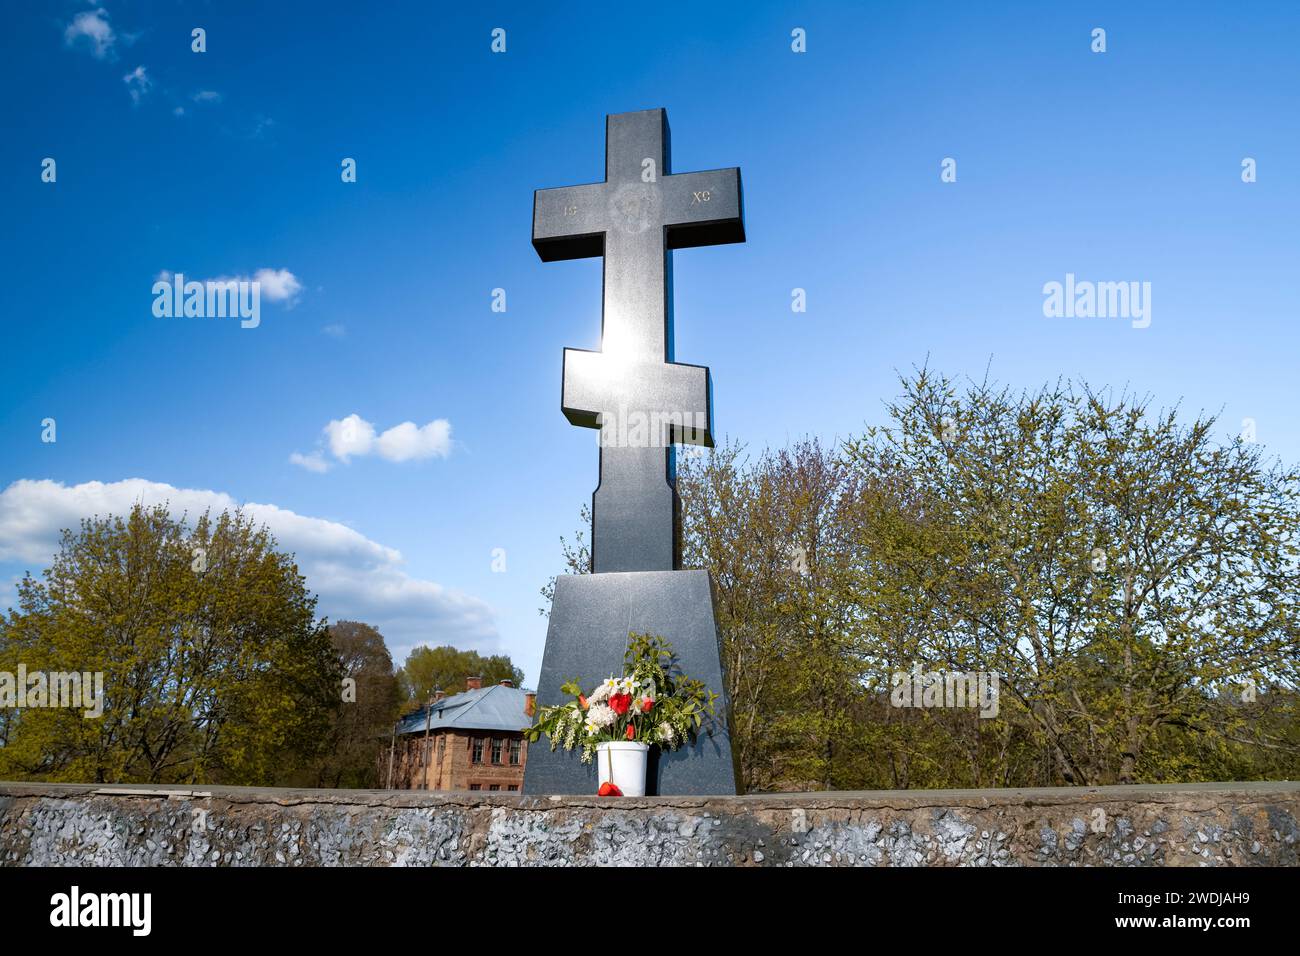 KINGISEPP, RUSSIA - MAY 08, 2023: A memorial cross at the burial site of Russian soldiers who died during the Russian-Swedish wars Stock Photo